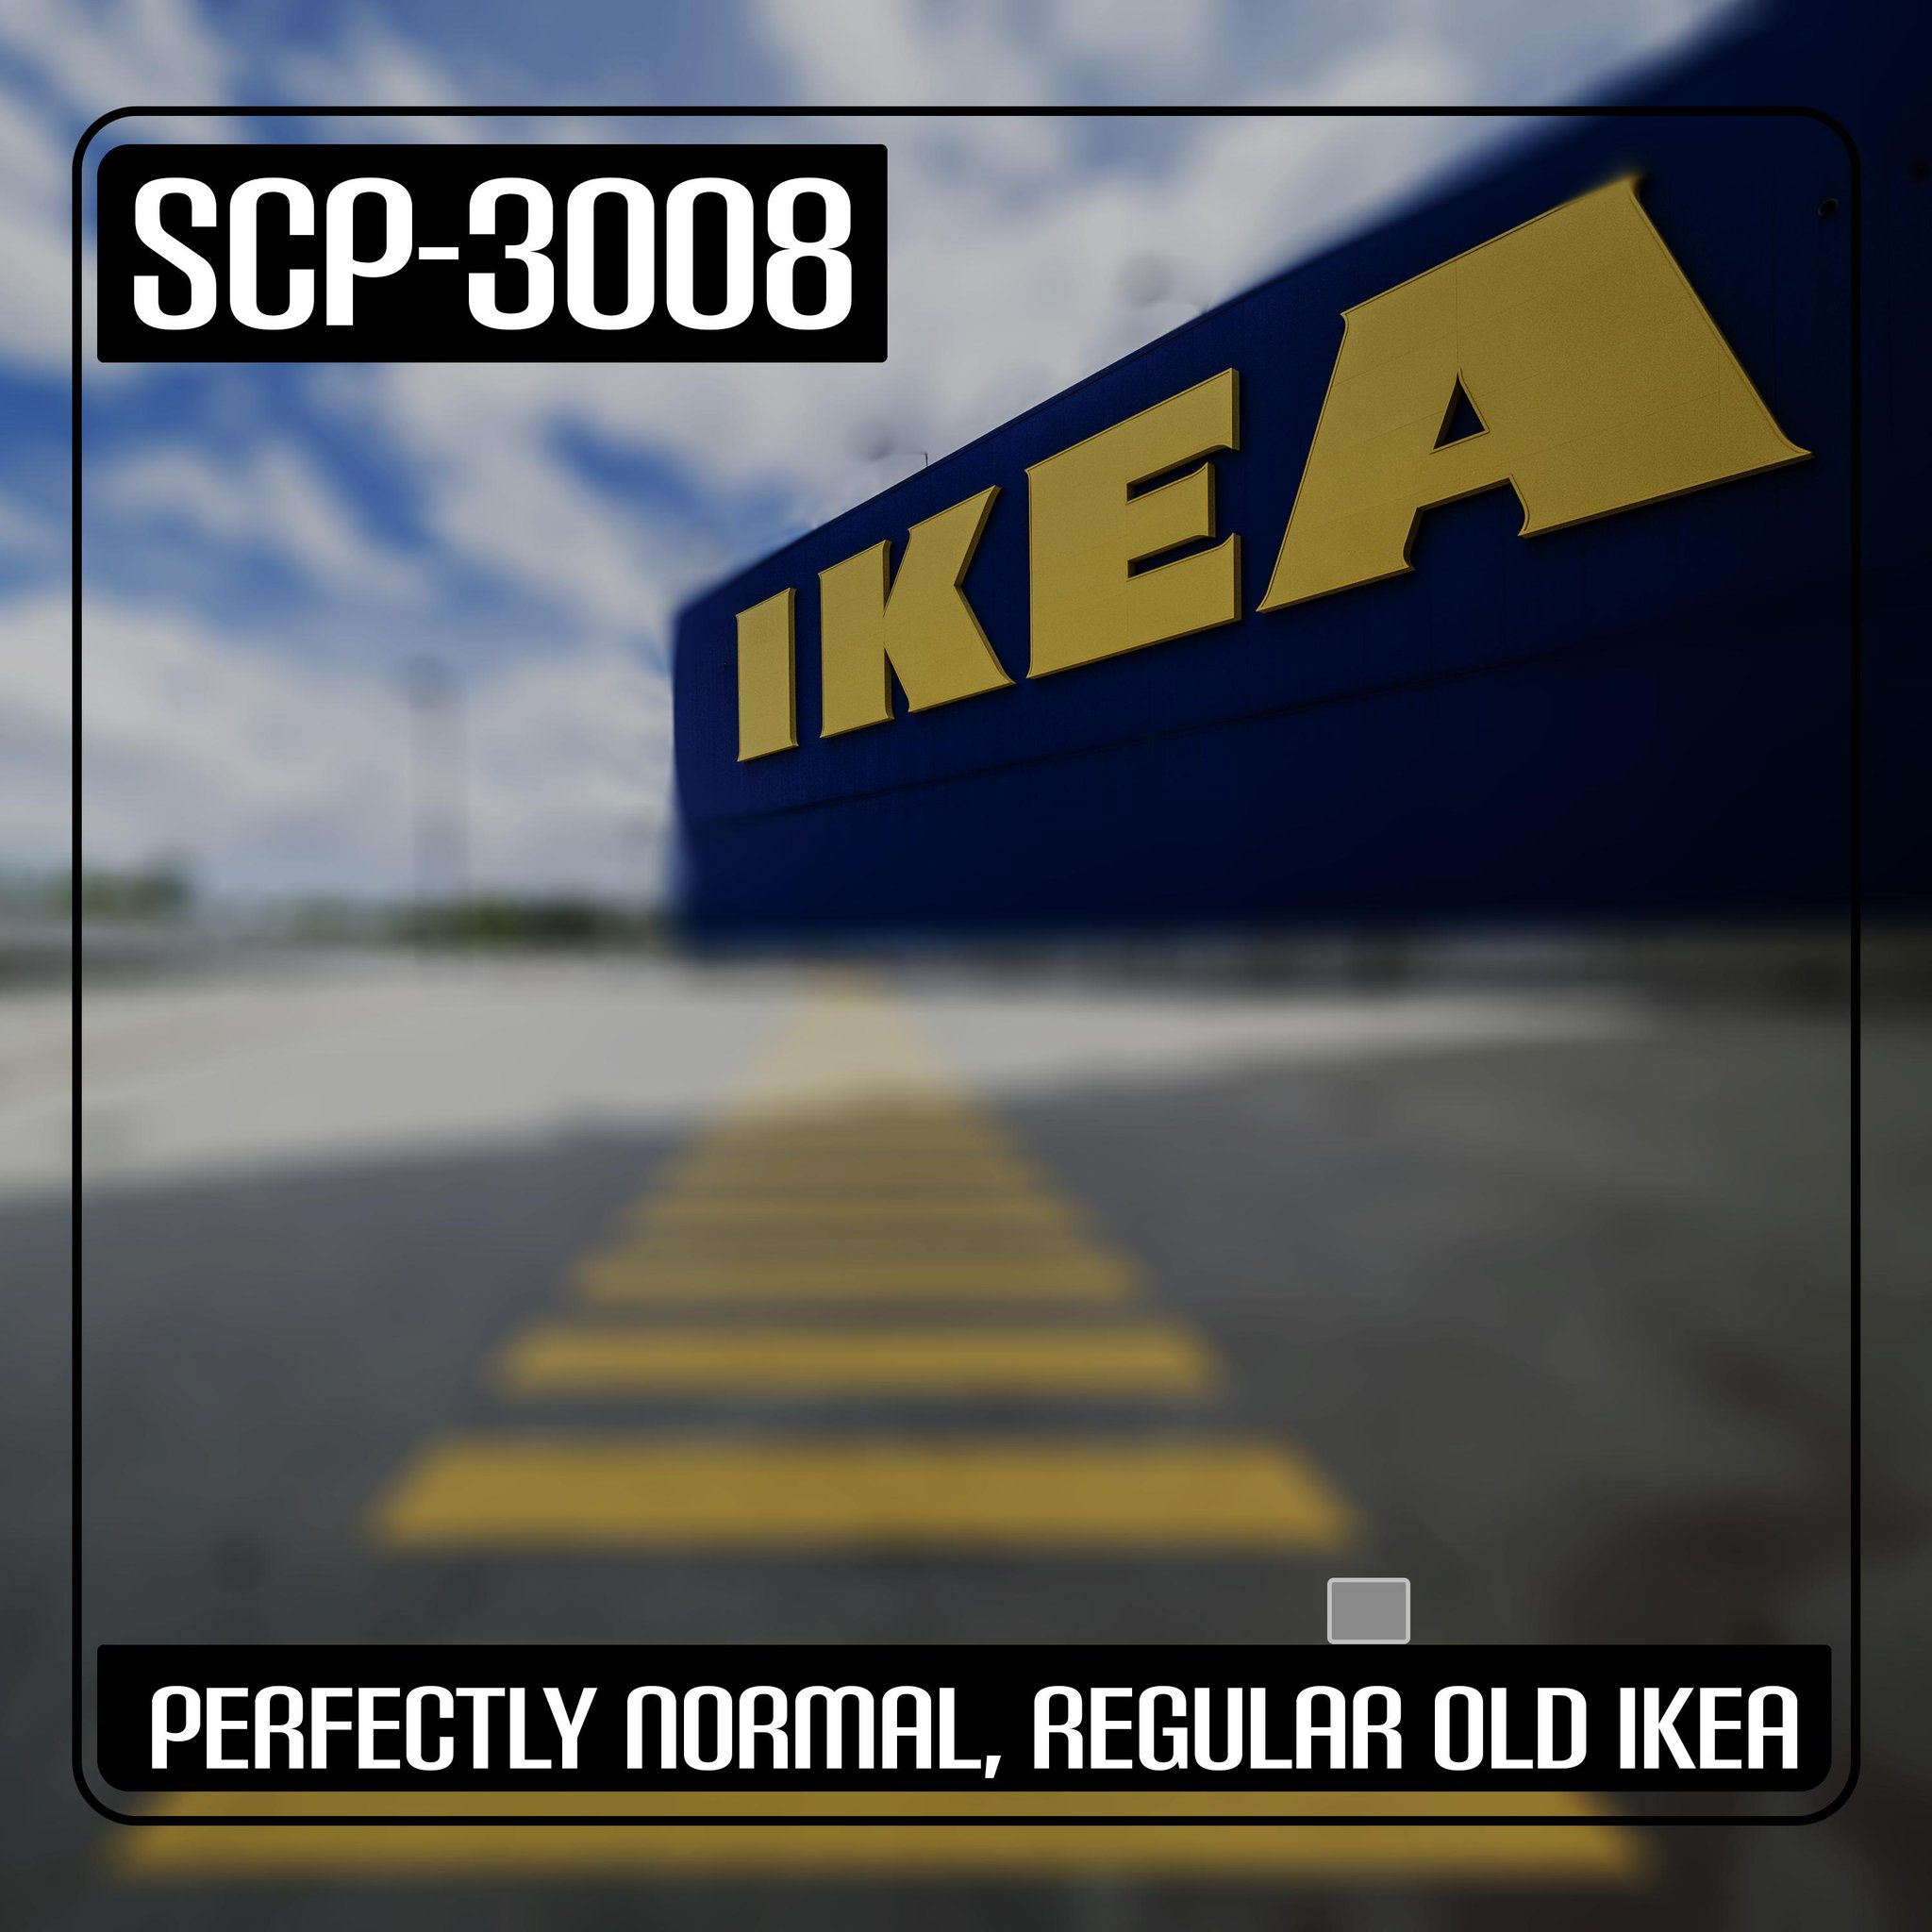 Podcast Take A Trip To A Perfectly Normal Ikea In Scp 3008